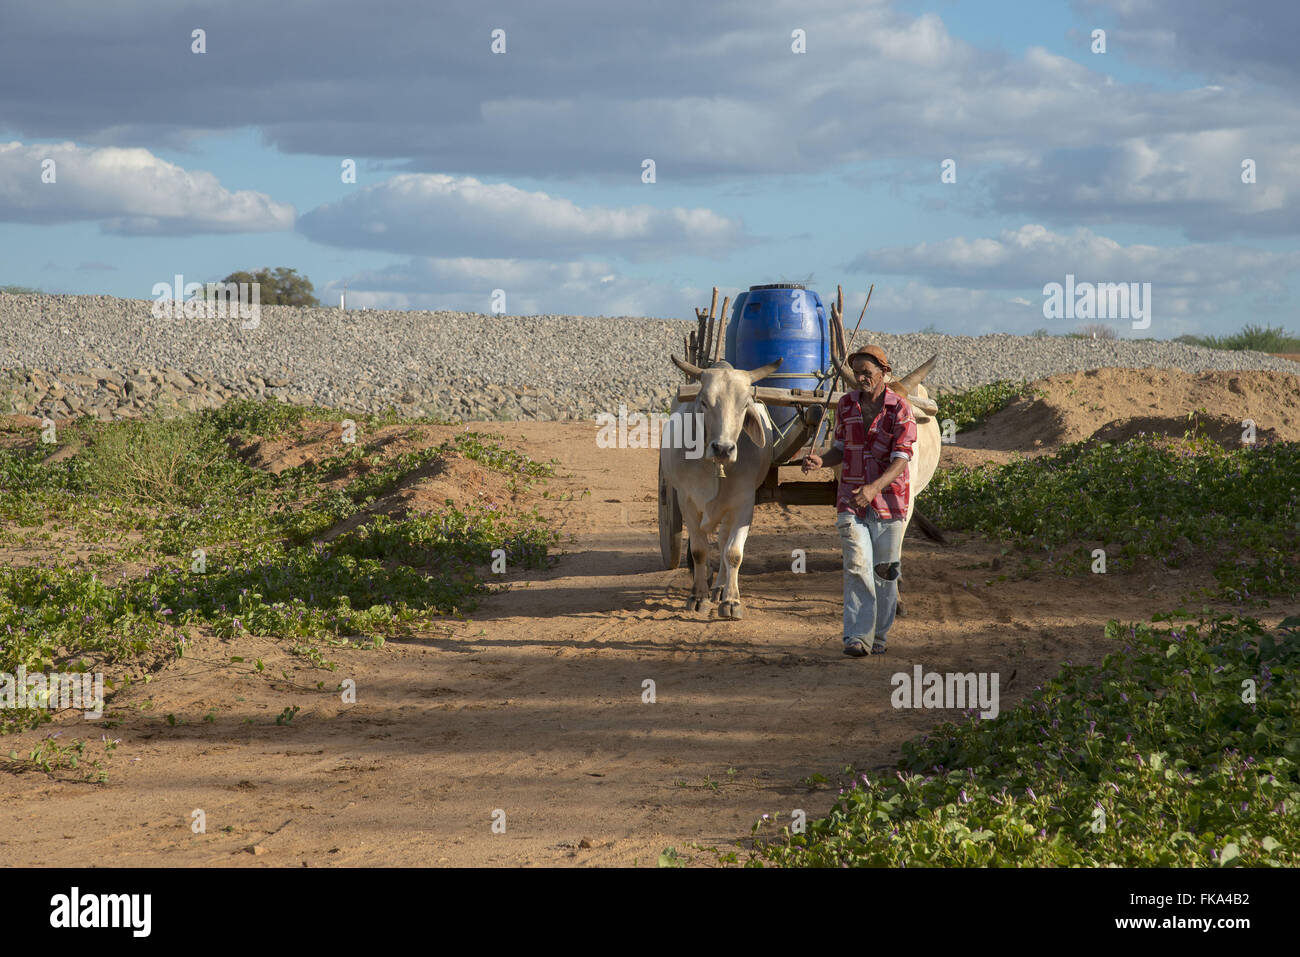 Backcountry with oxcart fetching water to village in the countryside Stock Photo